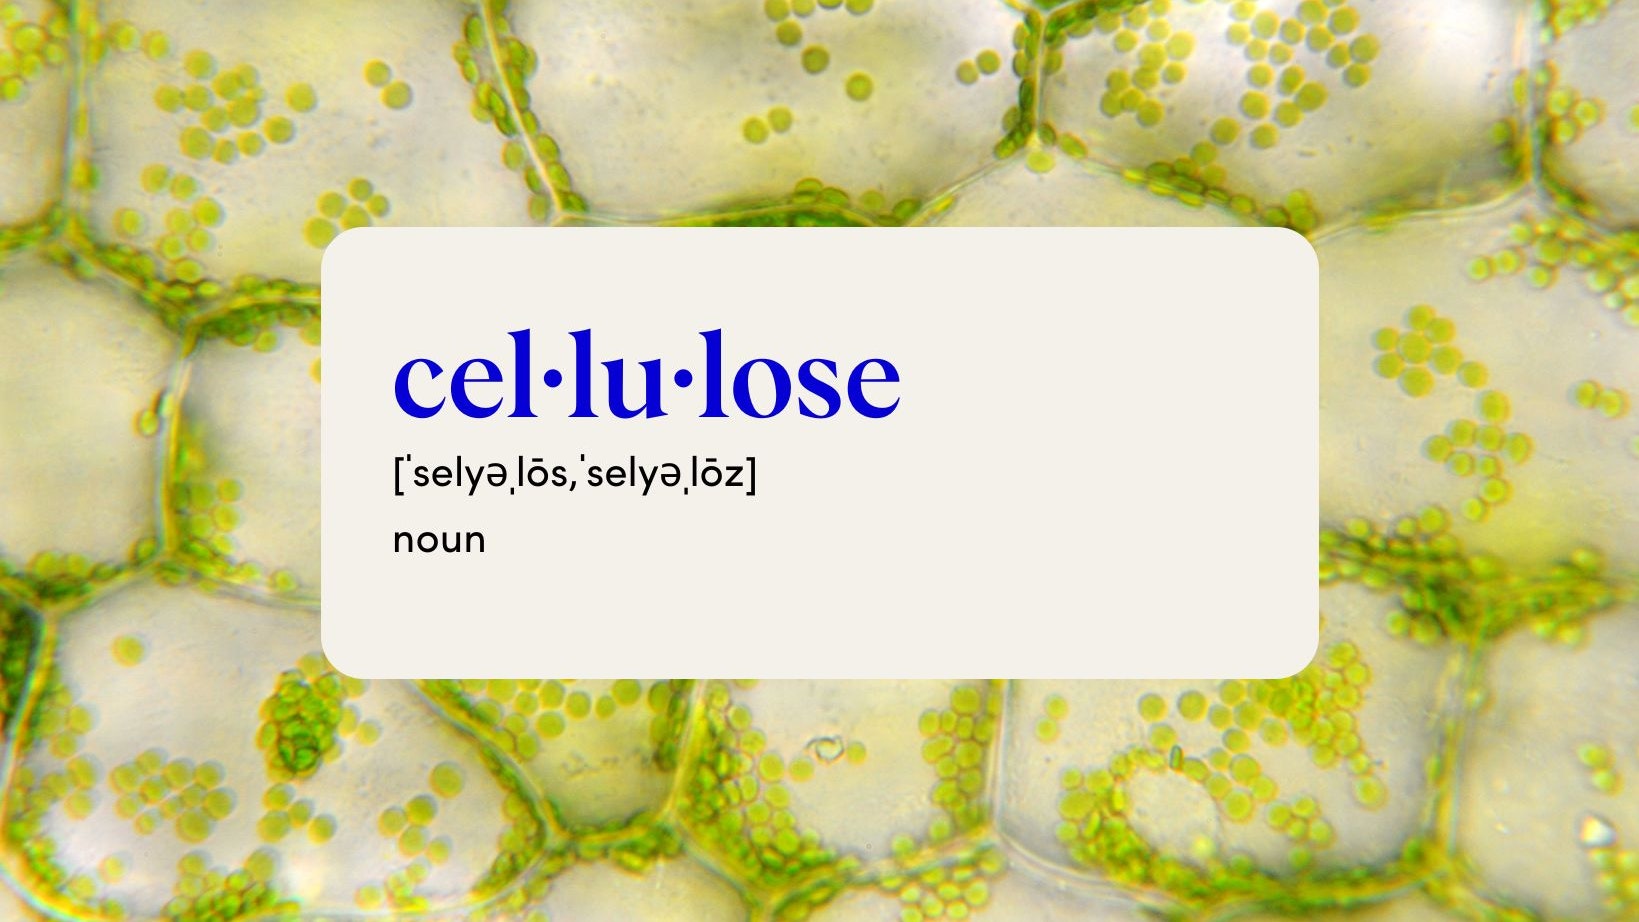 What is Cellulose?